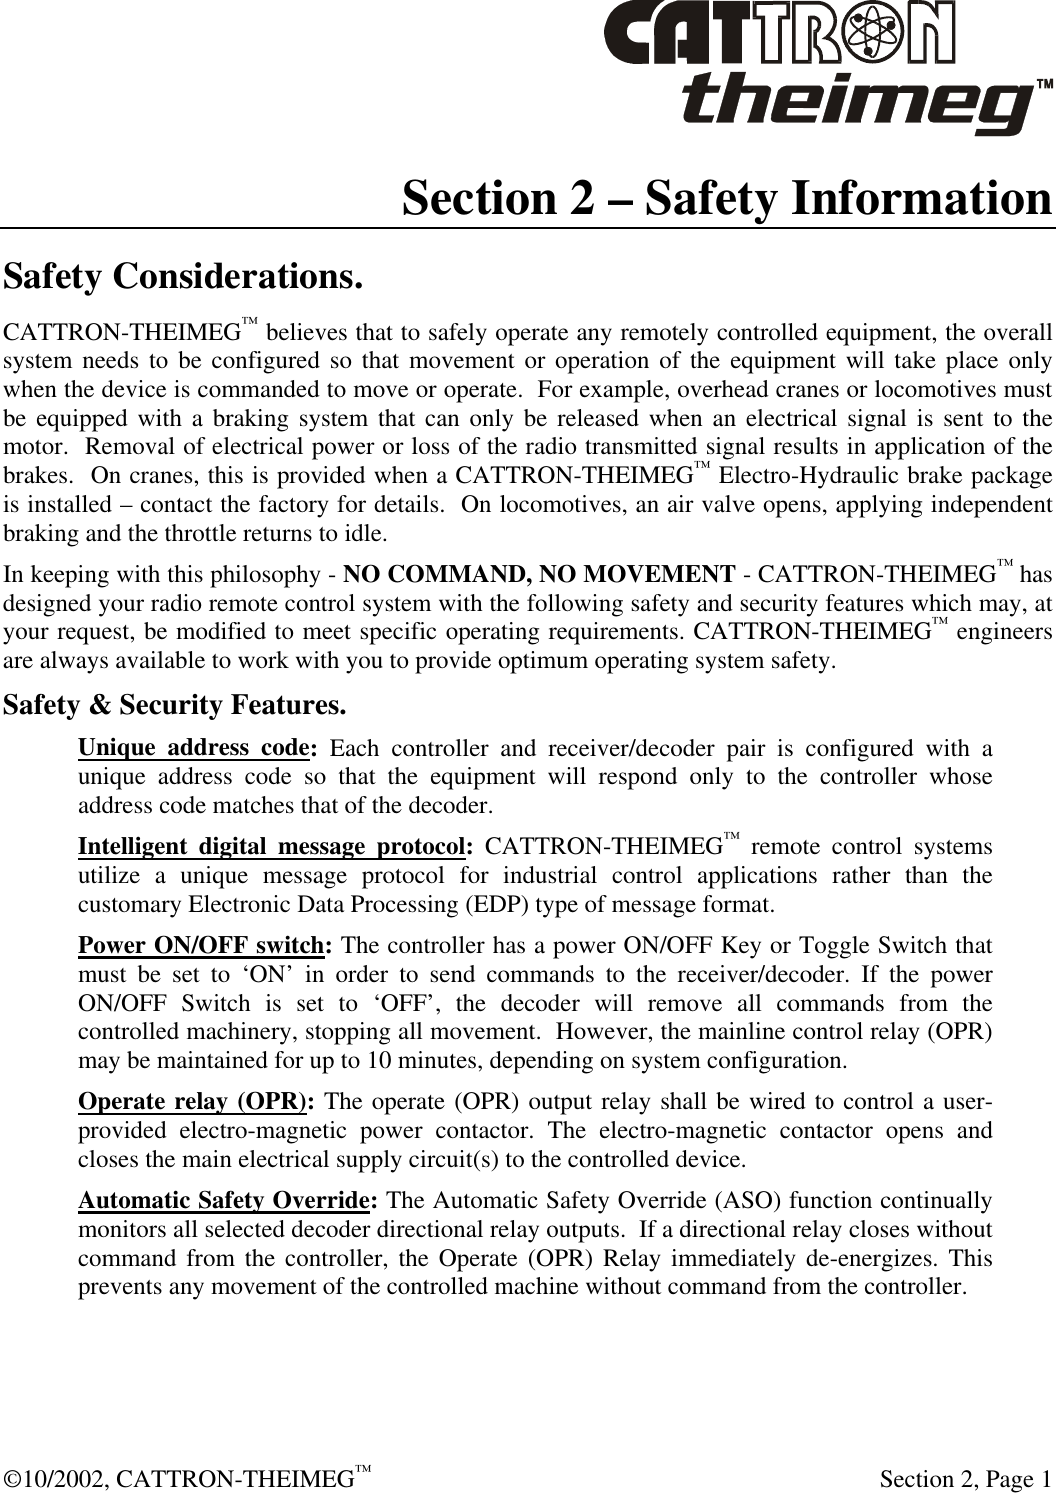  ©10/2002, CATTRON-THEIMEG™   Section 2, Page 1 Section 2 – Safety Information Safety Considerations. CATTRON-THEIMEG™ believes that to safely operate any remotely controlled equipment, the overall system needs to be configured so that movement or operation of the equipment will take place only when the device is commanded to move or operate.  For example, overhead cranes or locomotives must be equipped with a braking system that can only be released when an electrical signal is sent to the motor.  Removal of electrical power or loss of the radio transmitted signal results in application of the brakes.  On cranes, this is provided when a CATTRON-THEIMEG™ Electro-Hydraulic brake package is installed – contact the factory for details.  On locomotives, an air valve opens, applying independent braking and the throttle returns to idle.  In keeping with this philosophy - NO COMMAND, NO MOVEMENT - CATTRON-THEIMEG™ has designed your radio remote control system with the following safety and security features which may, at your request, be modified to meet specific operating requirements. CATTRON-THEIMEG™ engineers are always available to work with you to provide optimum operating system safety.  Safety &amp; Security Features. Unique address code: Each controller and receiver/decoder pair is configured with a unique address code so that the equipment will respond only to the controller whose address code matches that of the decoder. Intelligent digital message protocol: CATTRON-THEIMEG™ remote control systems utilize a unique message protocol for industrial control applications rather than the customary Electronic Data Processing (EDP) type of message format. Power ON/OFF switch: The controller has a power ON/OFF Key or Toggle Switch that must be set to ‘ON’ in order to send commands to the receiver/decoder. If the power ON/OFF Switch is set to ‘OFF’, the decoder will remove all commands from the controlled machinery, stopping all movement.  However, the mainline control relay (OPR) may be maintained for up to 10 minutes, depending on system configuration. Operate relay (OPR): The operate (OPR) output relay shall be wired to control a user-provided electro-magnetic power contactor. The electro-magnetic contactor opens and closes the main electrical supply circuit(s) to the controlled device. Automatic Safety Override: The Automatic Safety Override (ASO) function continually monitors all selected decoder directional relay outputs.  If a directional relay closes without command from the controller, the Operate (OPR) Relay immediately de-energizes. This prevents any movement of the controlled machine without command from the controller.  